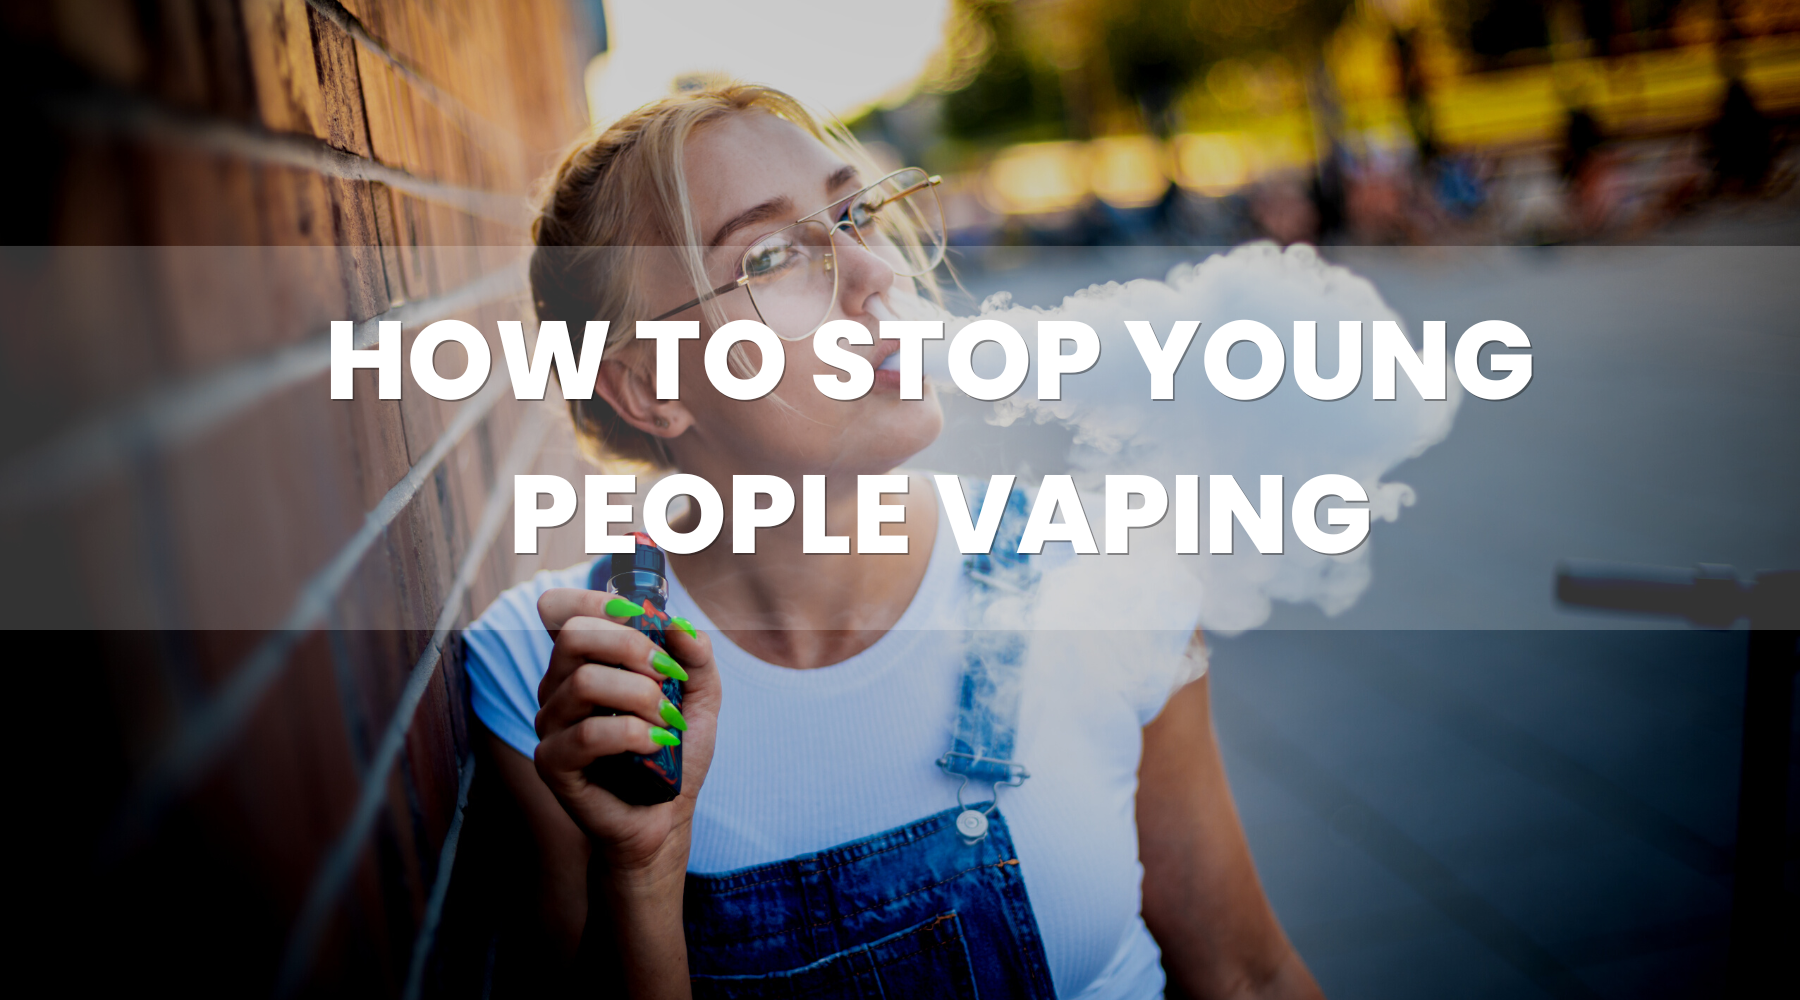 How to Help Stop Young People Vaping?